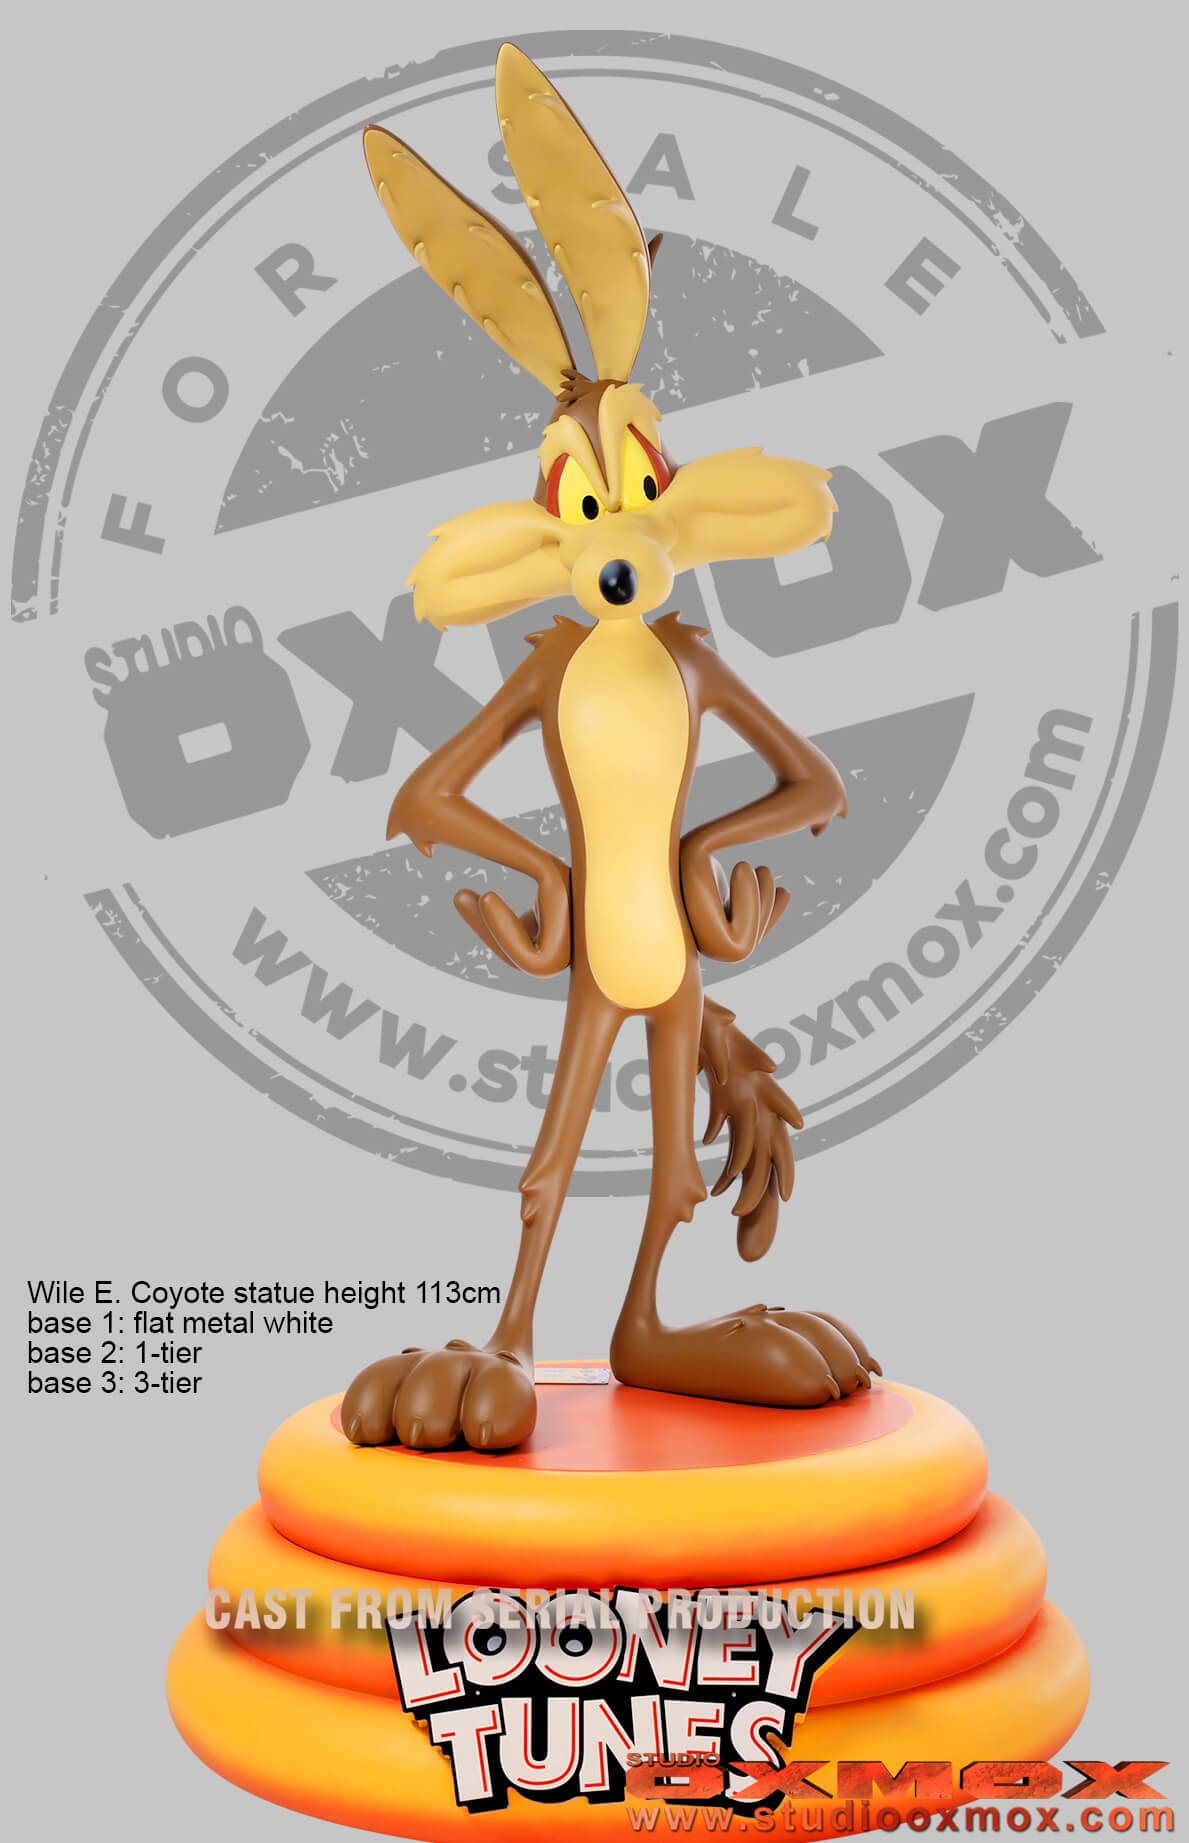 Looney Tunes statues, Wile E. Coyote life size with large base